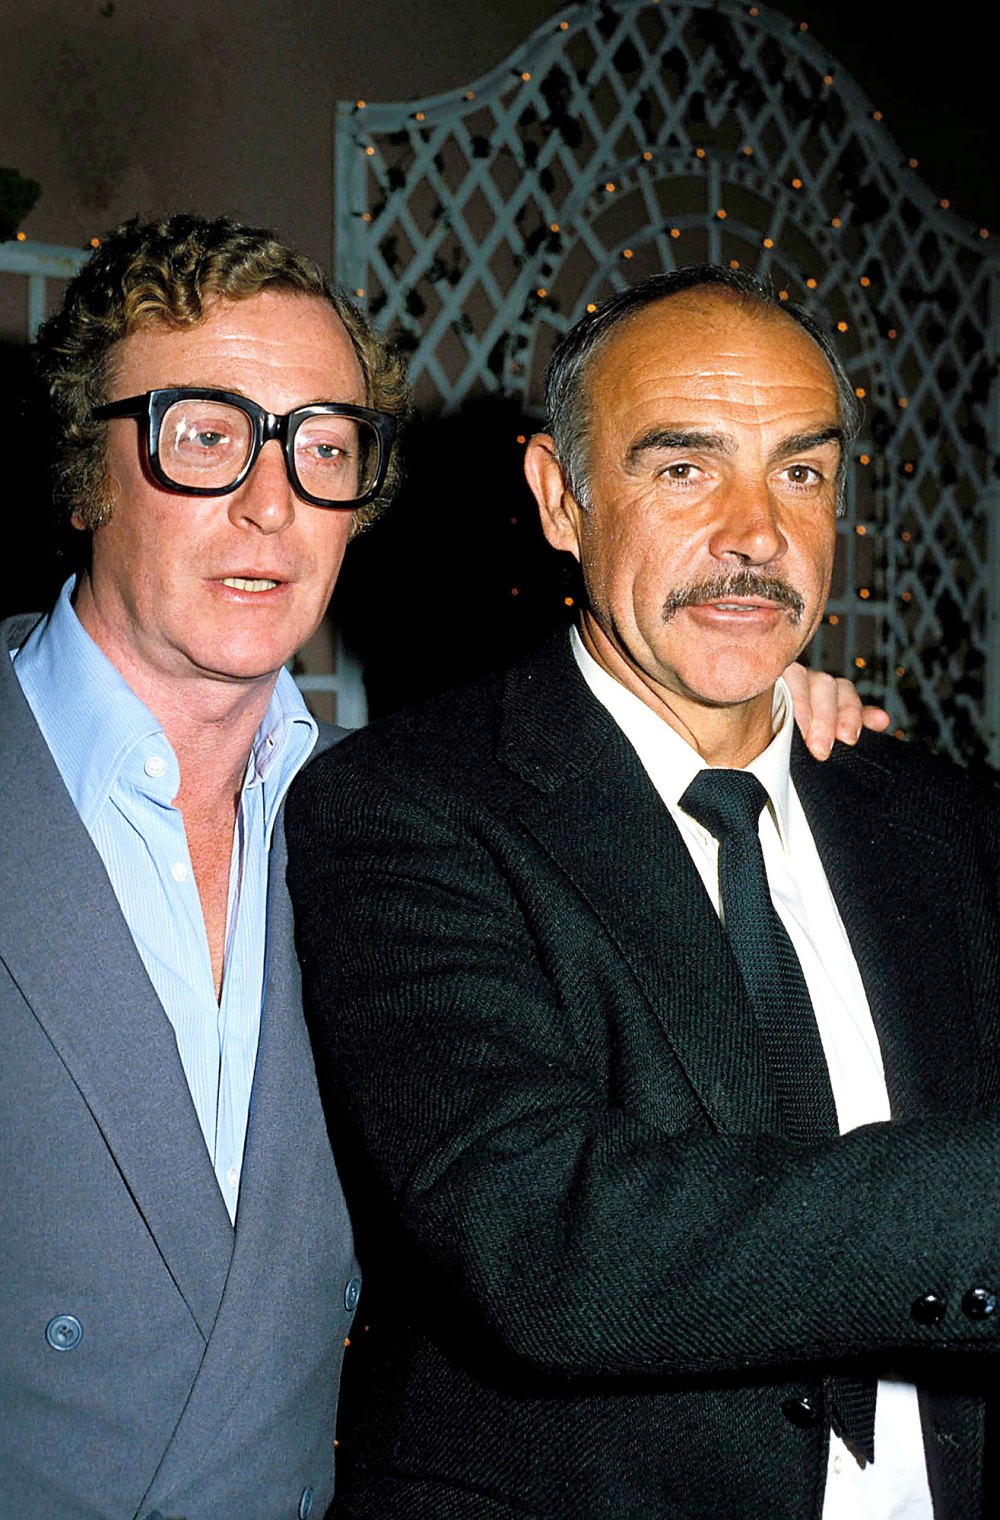 Michael Caine Slams Sean Connery Alzheimer’s Quotes as “Completely Preposterous”